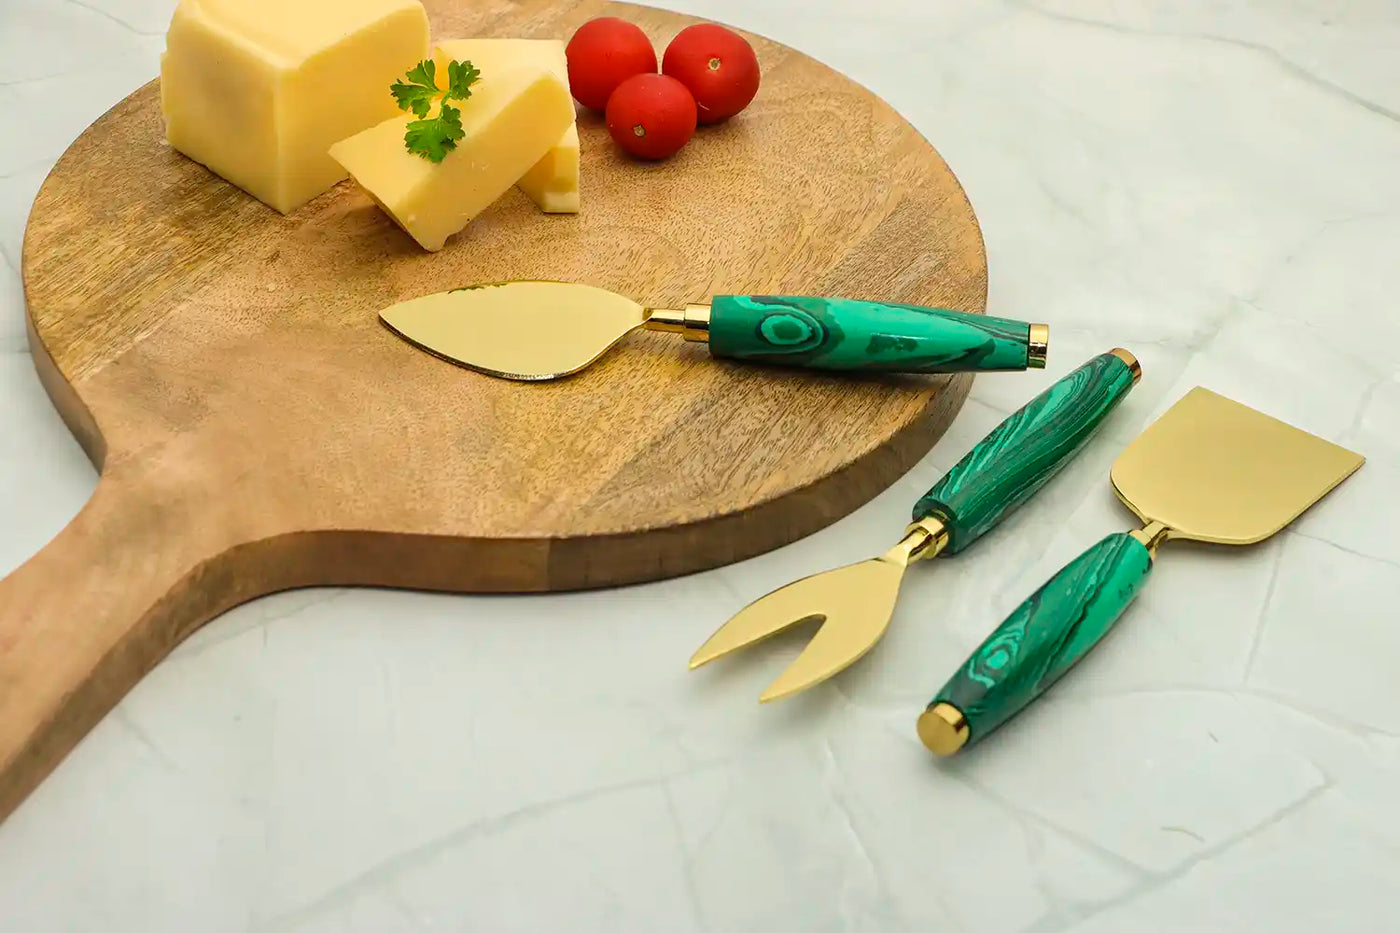 Green Stone Dust with Stainless Steel Cheese Server - Set of 3 - Dining & Kitchen - 2